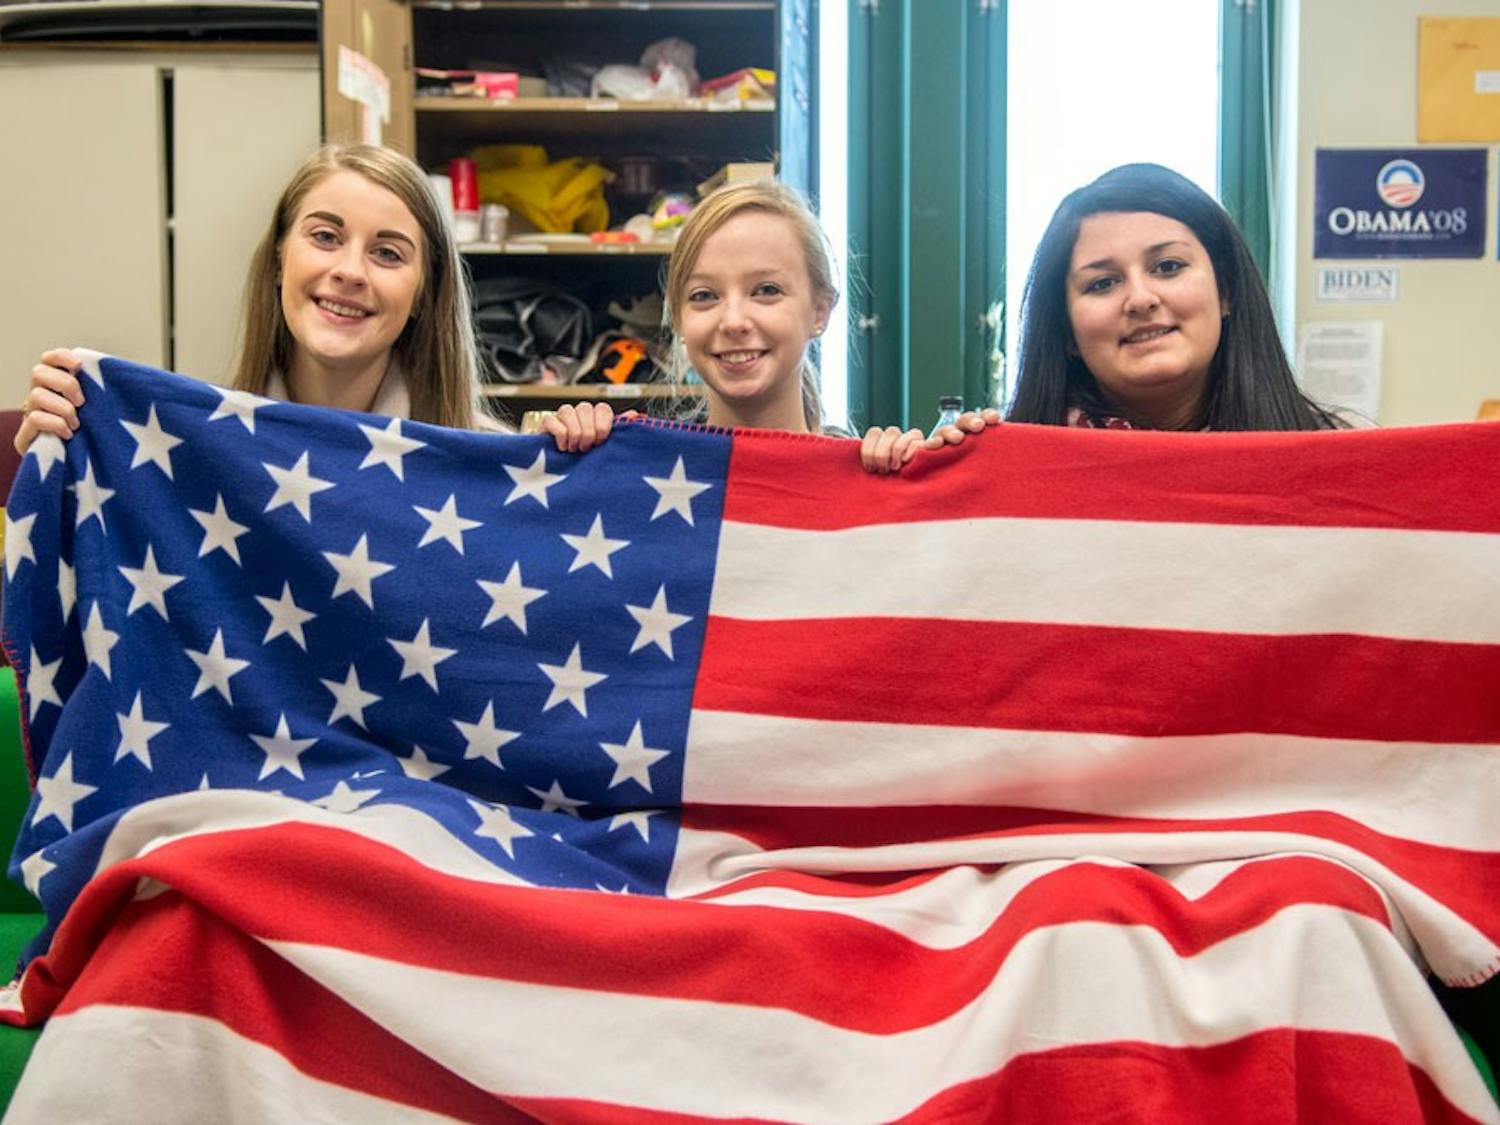 (From left to right)&nbsp;Katie Henshaw, a senior psychology major, Erica Lutz, vice president of UB College Republicans and a junior communication and political science major, and Alexis Ogra, president of UB College Republicans and a sophomore history major, pose with the American flag in the club office.